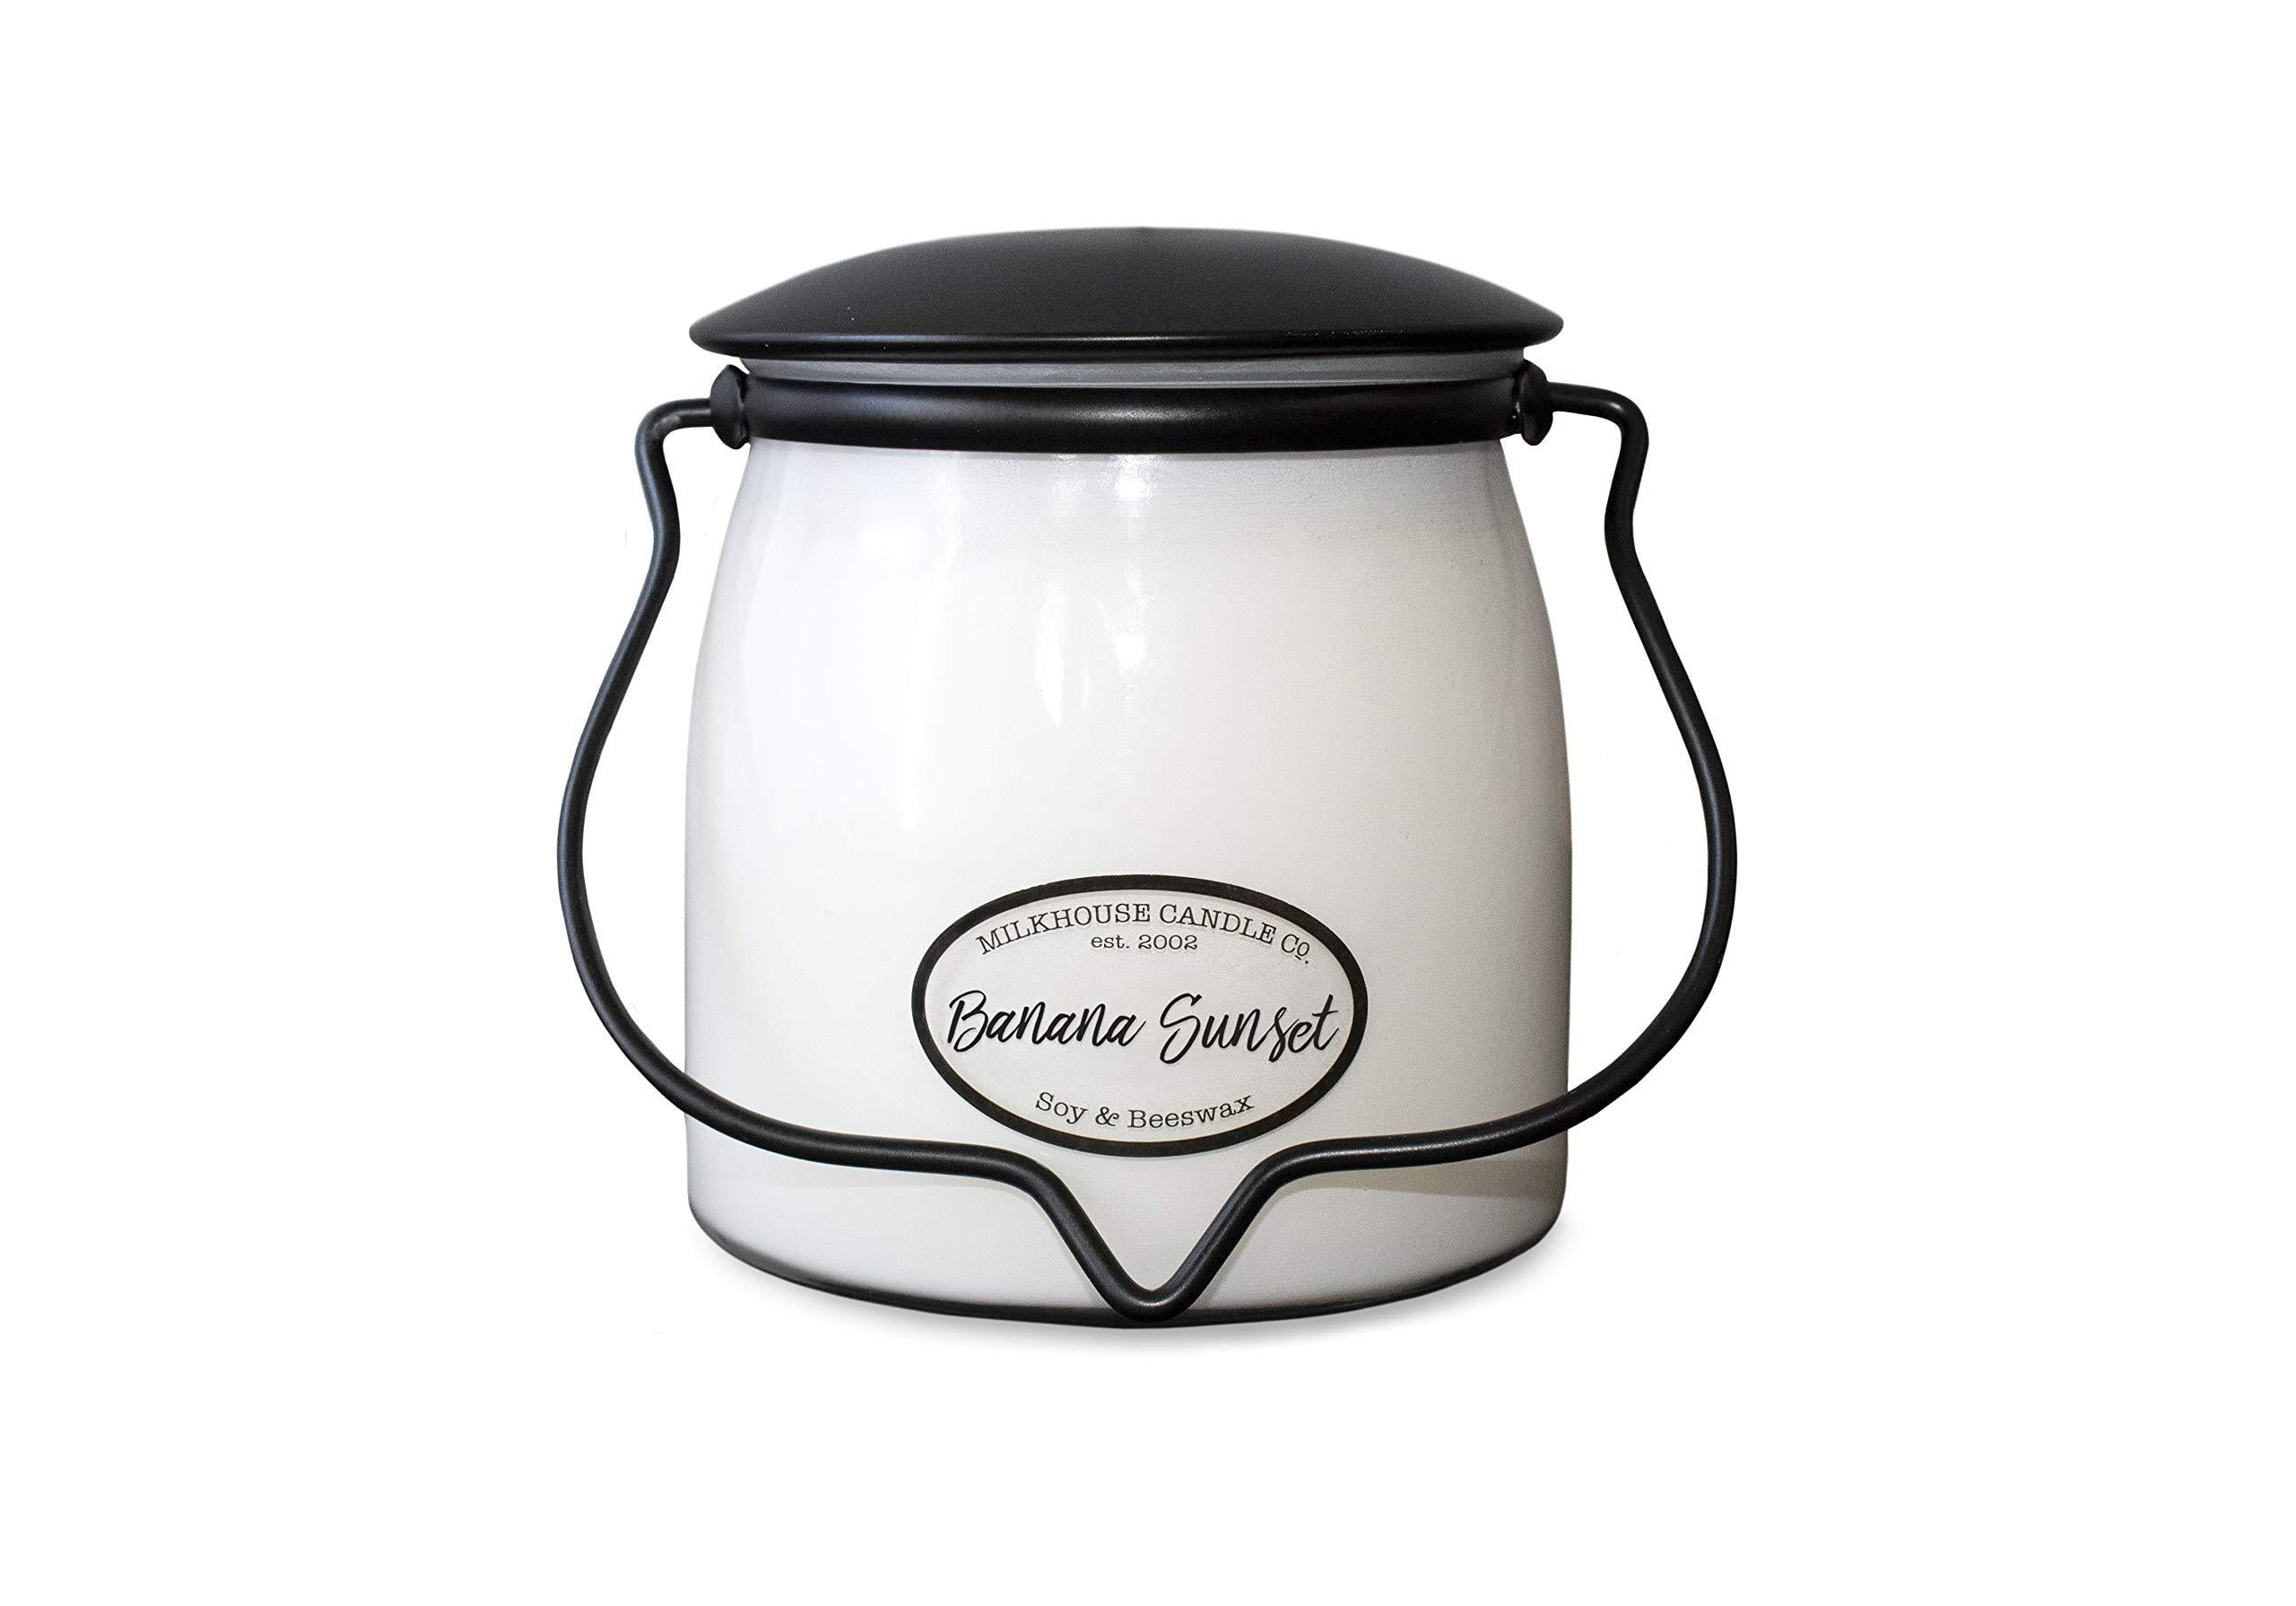 Apple Strudel 16-Ounce Butter Jar Candle Milkhouse Candle Creamery Scented Soy Candle